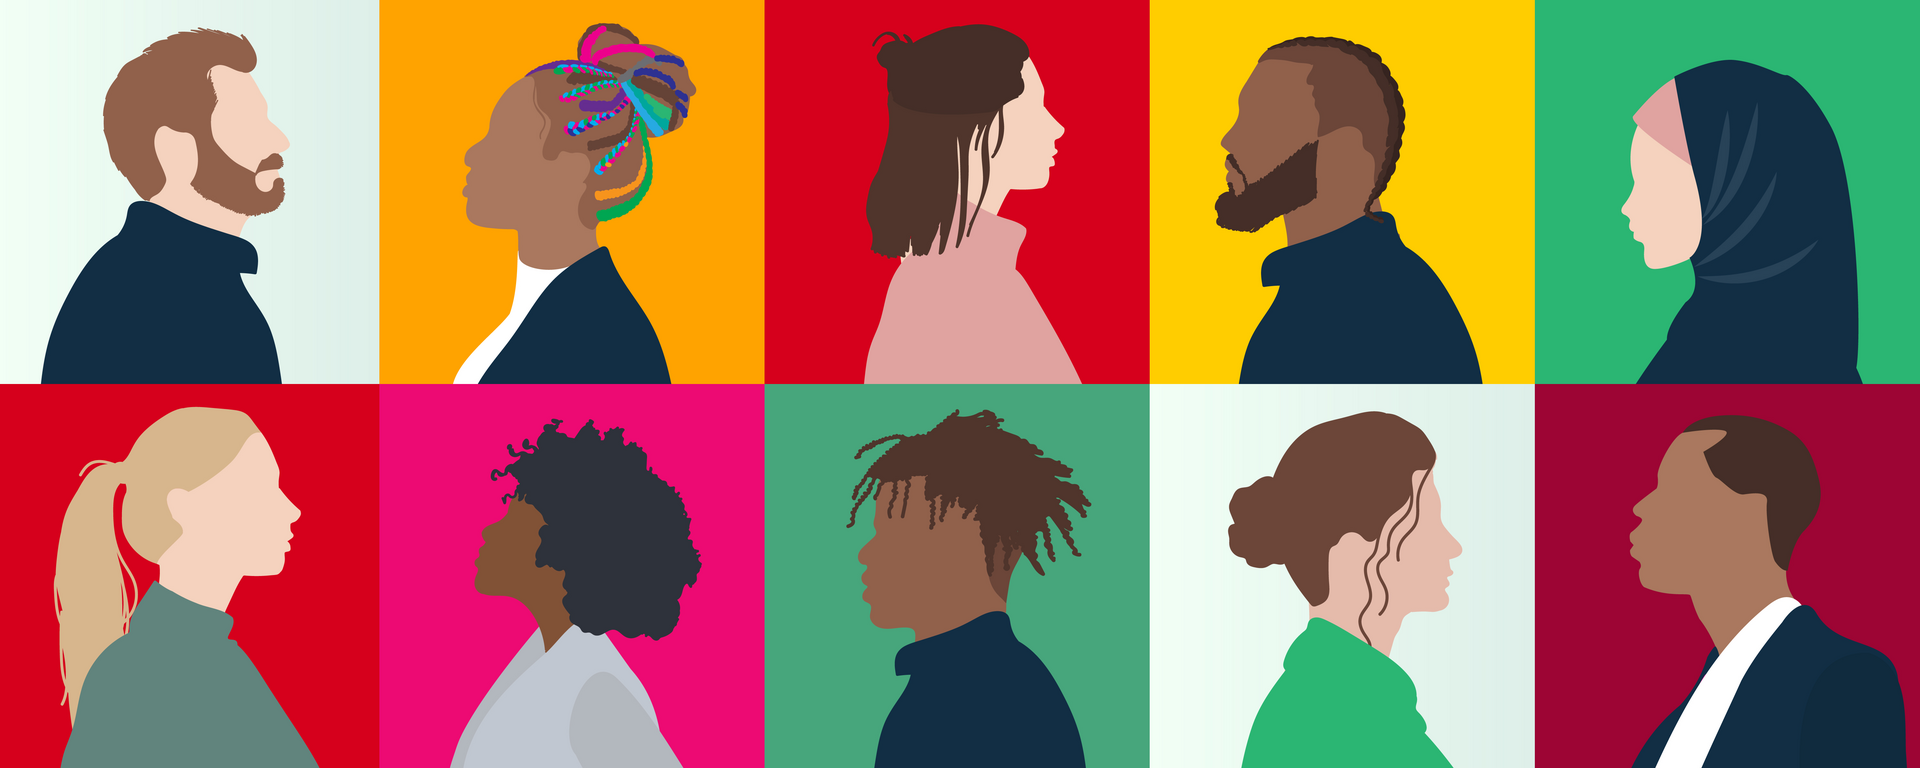 Profiles of different races on a multicolour background